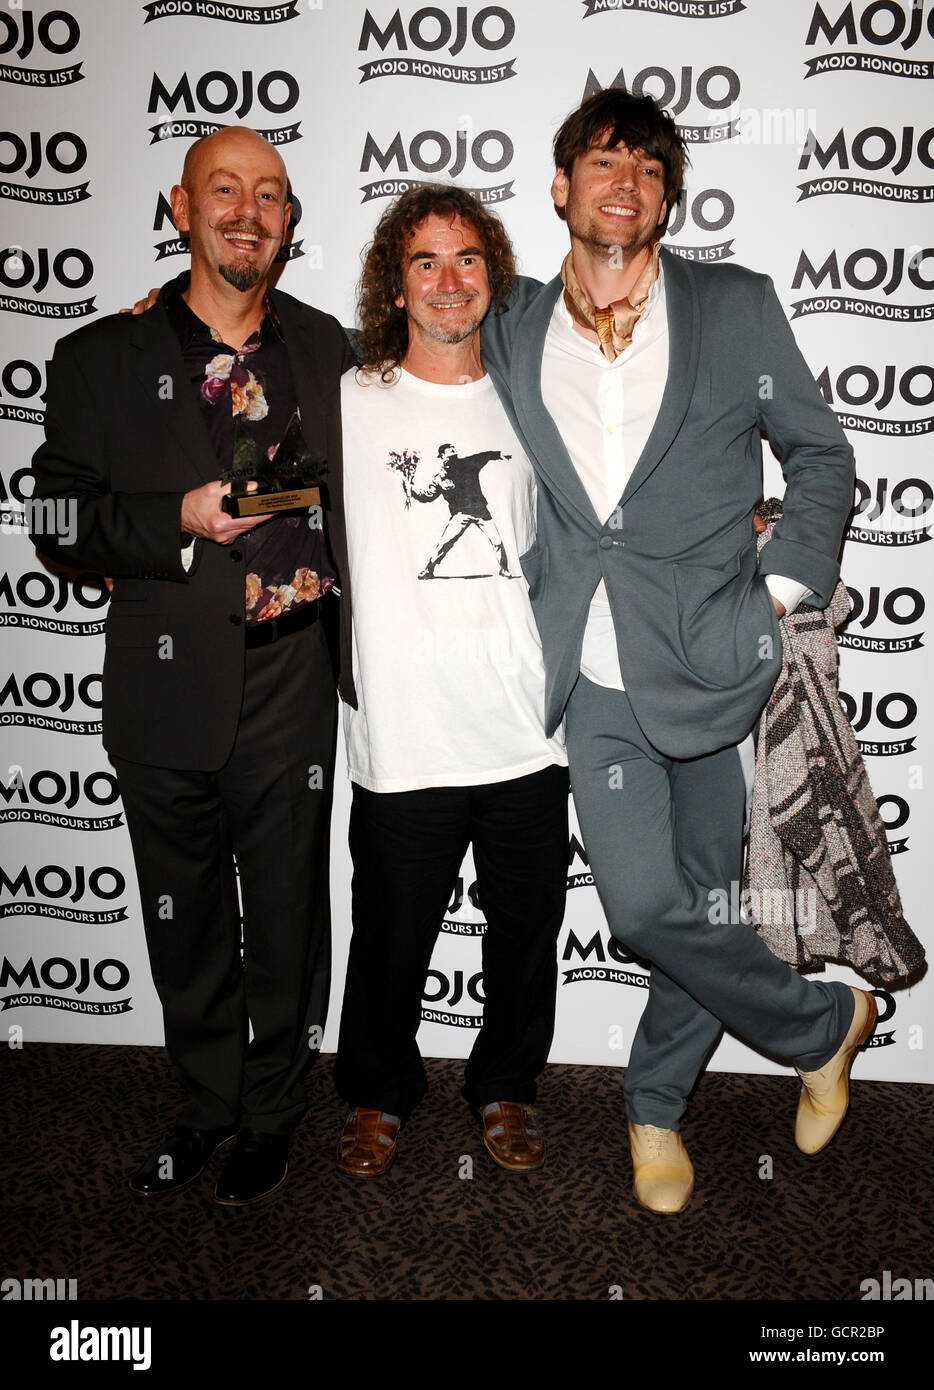 MOJO Honours List 2010 - London. Teardrop Explodes with award and Alex James (R) at the MOJO Honours List 2010 at the Brewery in London. Stock Photo